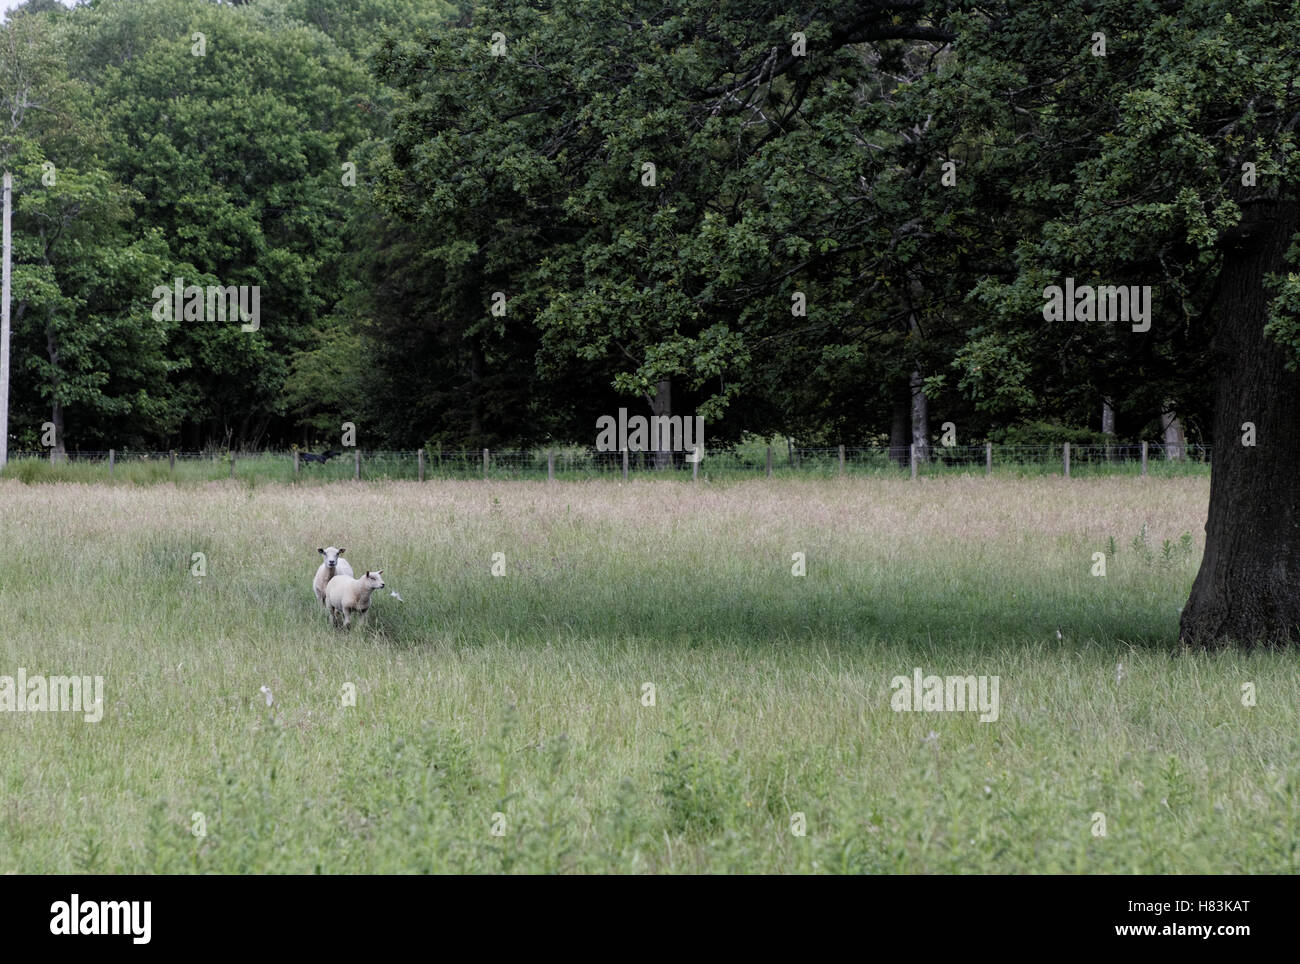 Sheep in a field of grass Stock Photo